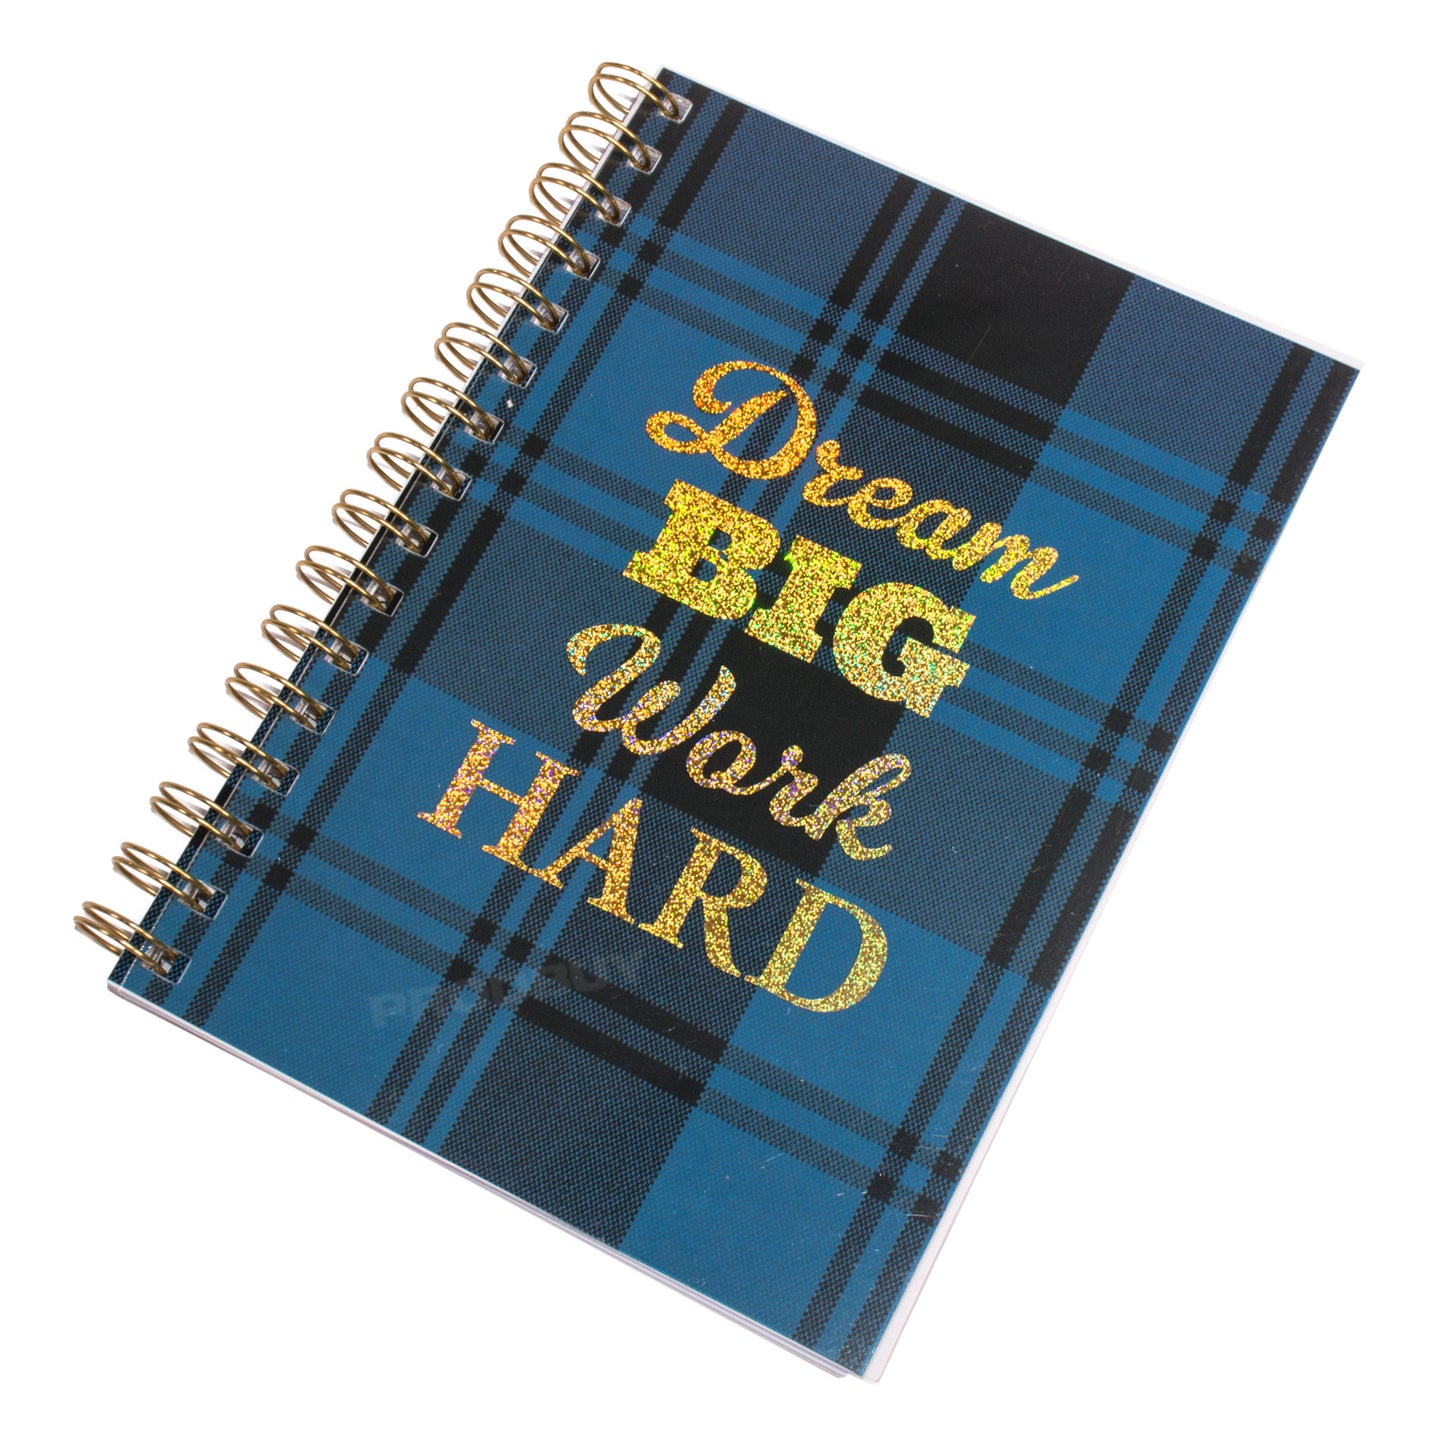 Spiral A5 Journal Softback Lined Paper Writing Notebook with Motivational Pattern